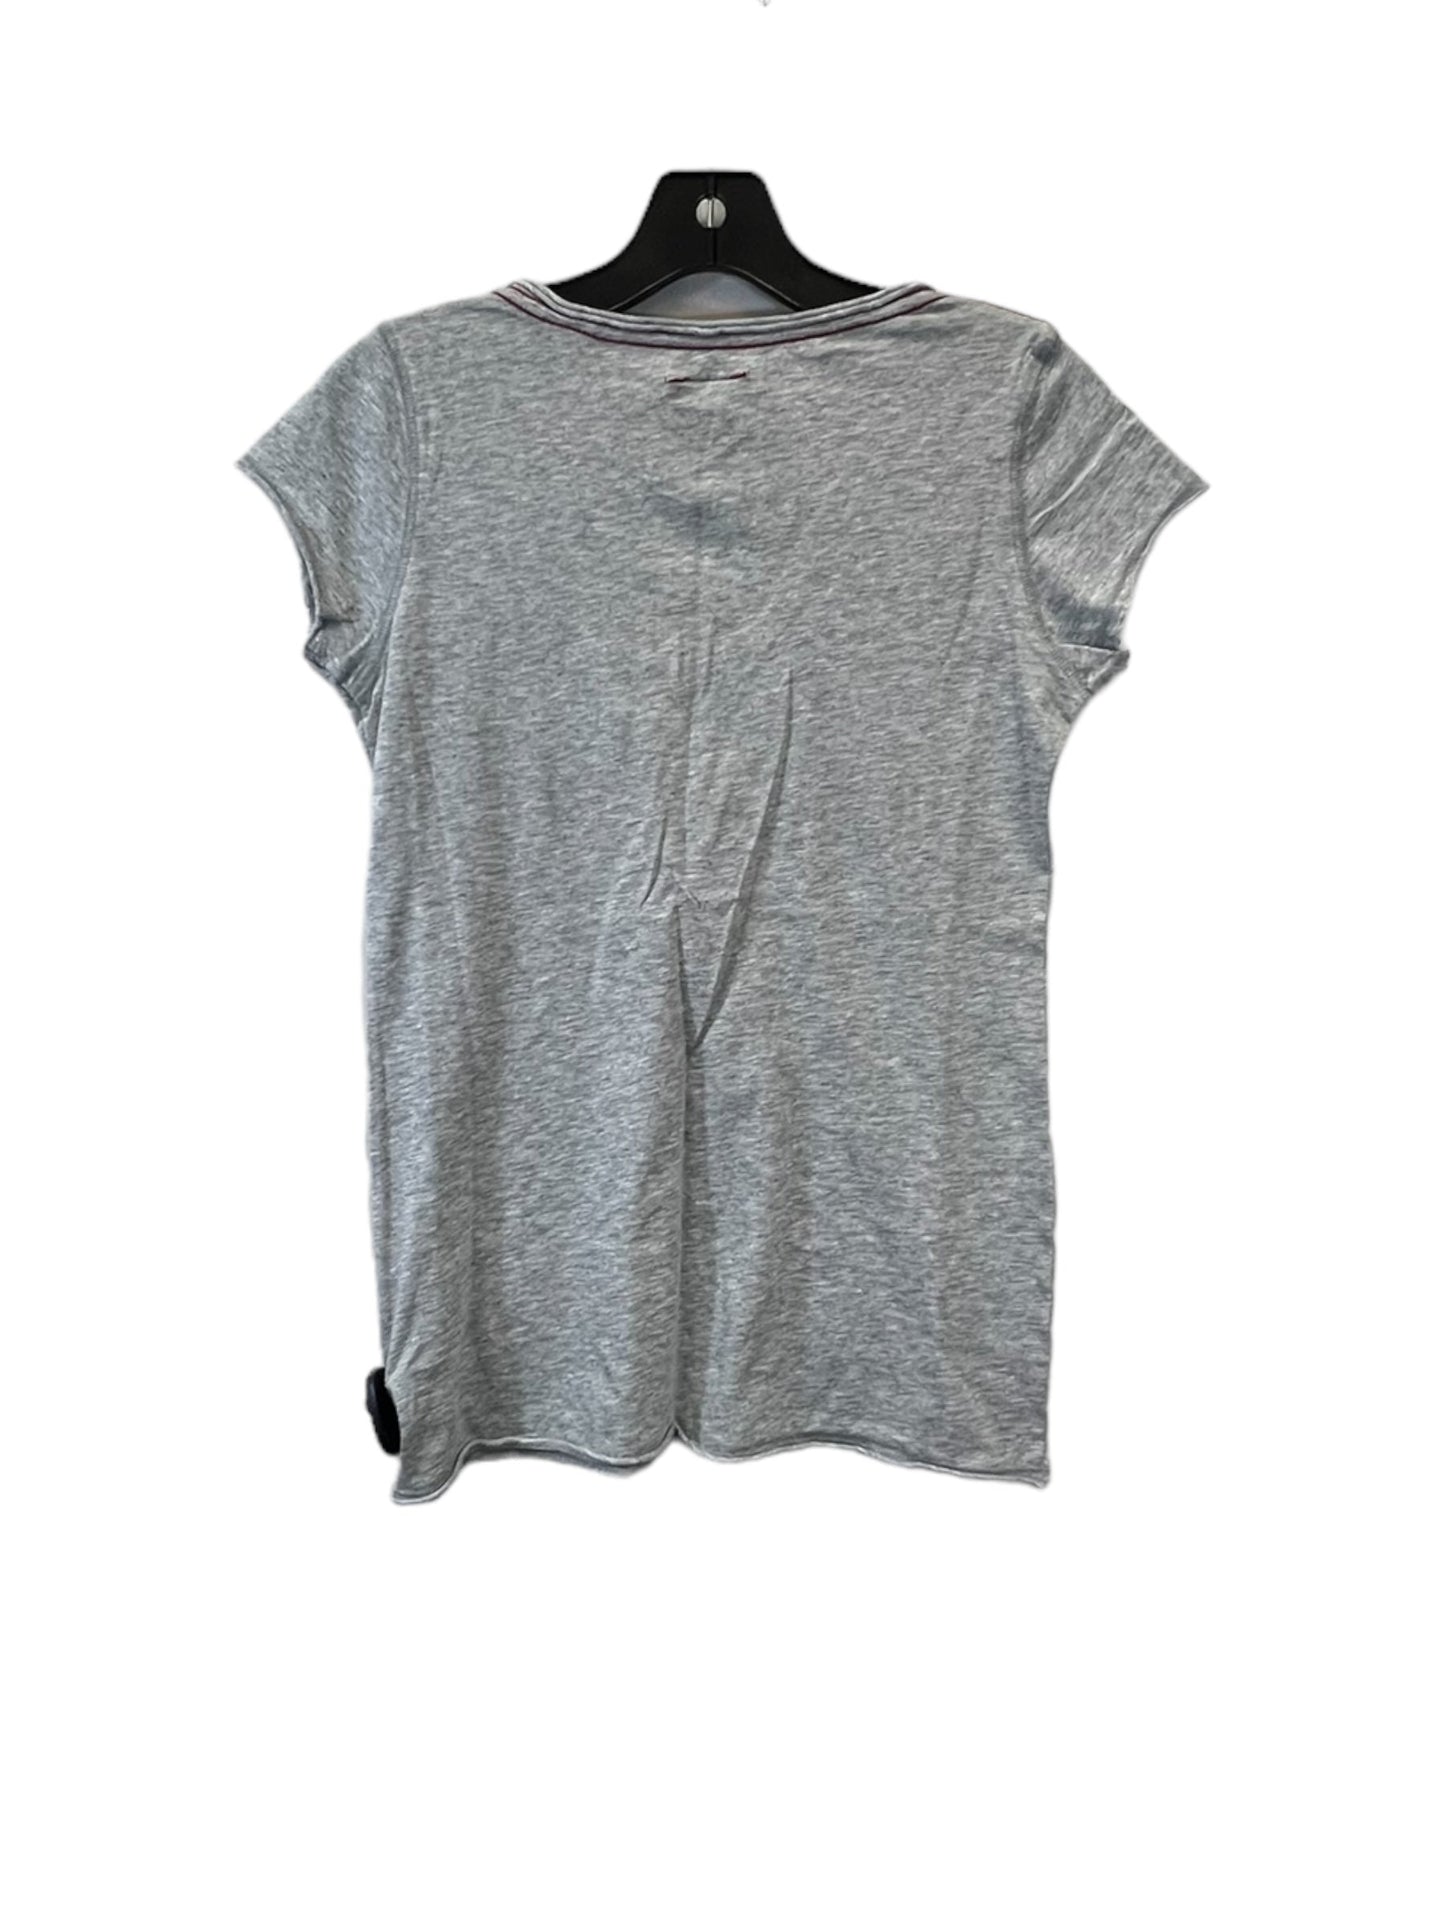 Grey & Red Top Short Sleeve Basic Gap, Size S